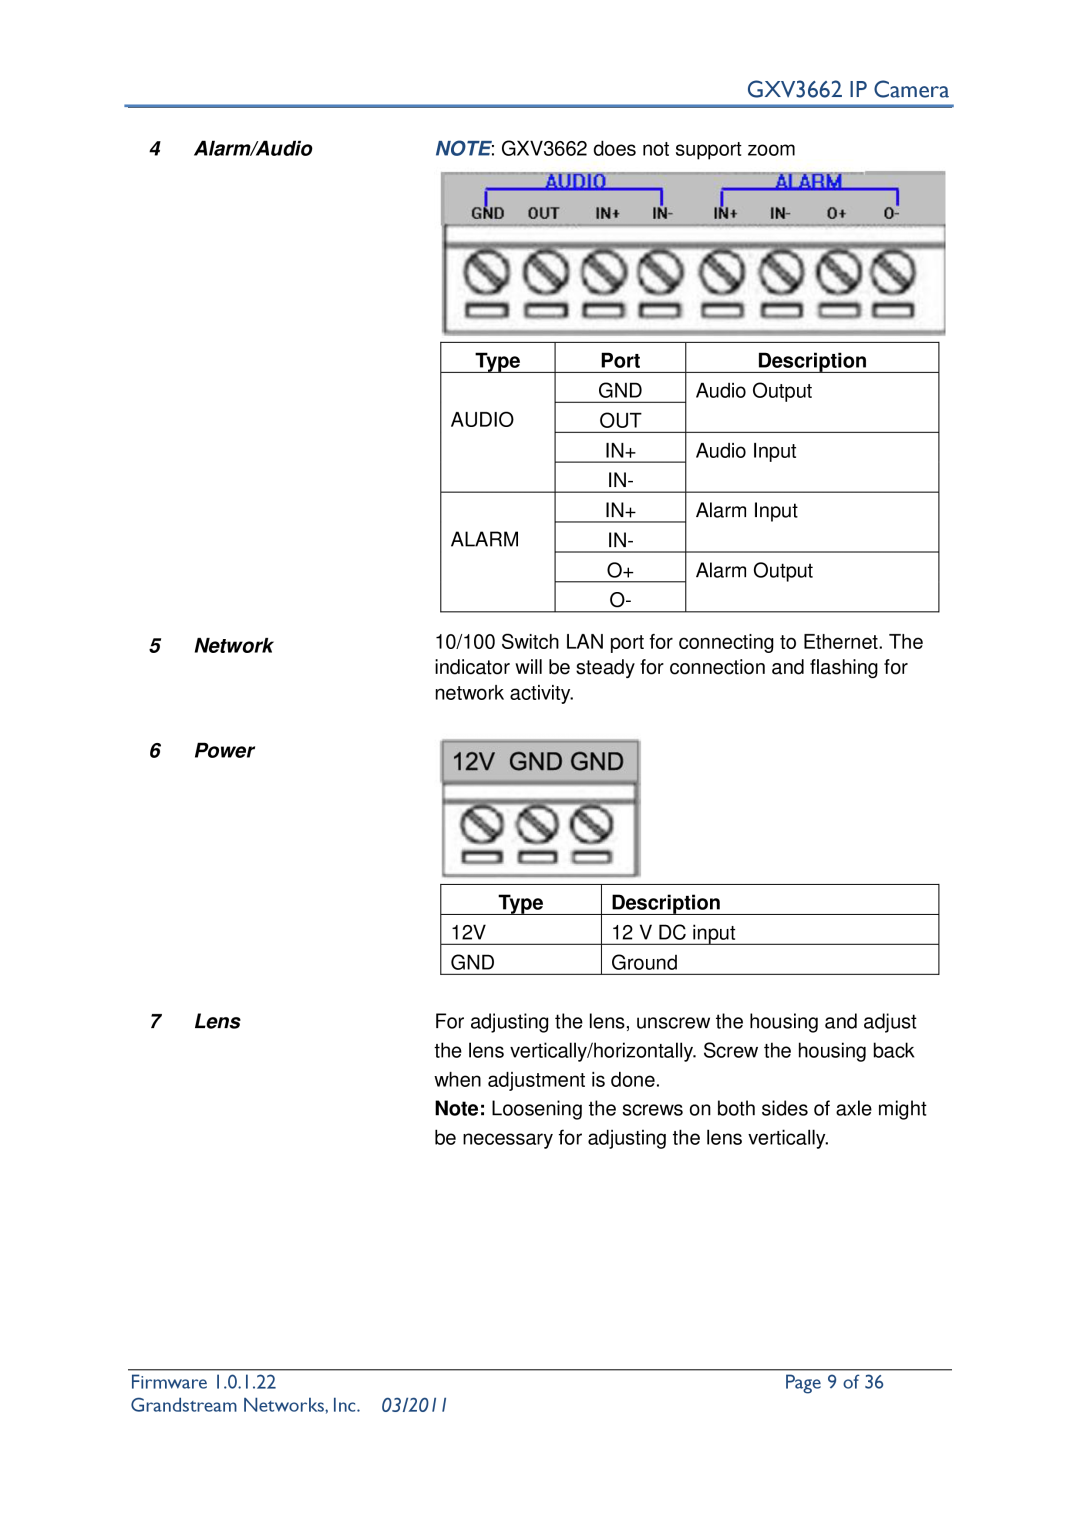 Grandstream Networks user manual Page 9 of, GXV3662 IP Camera, Firmware, Grandstream Networks, Inc, 03/2011 